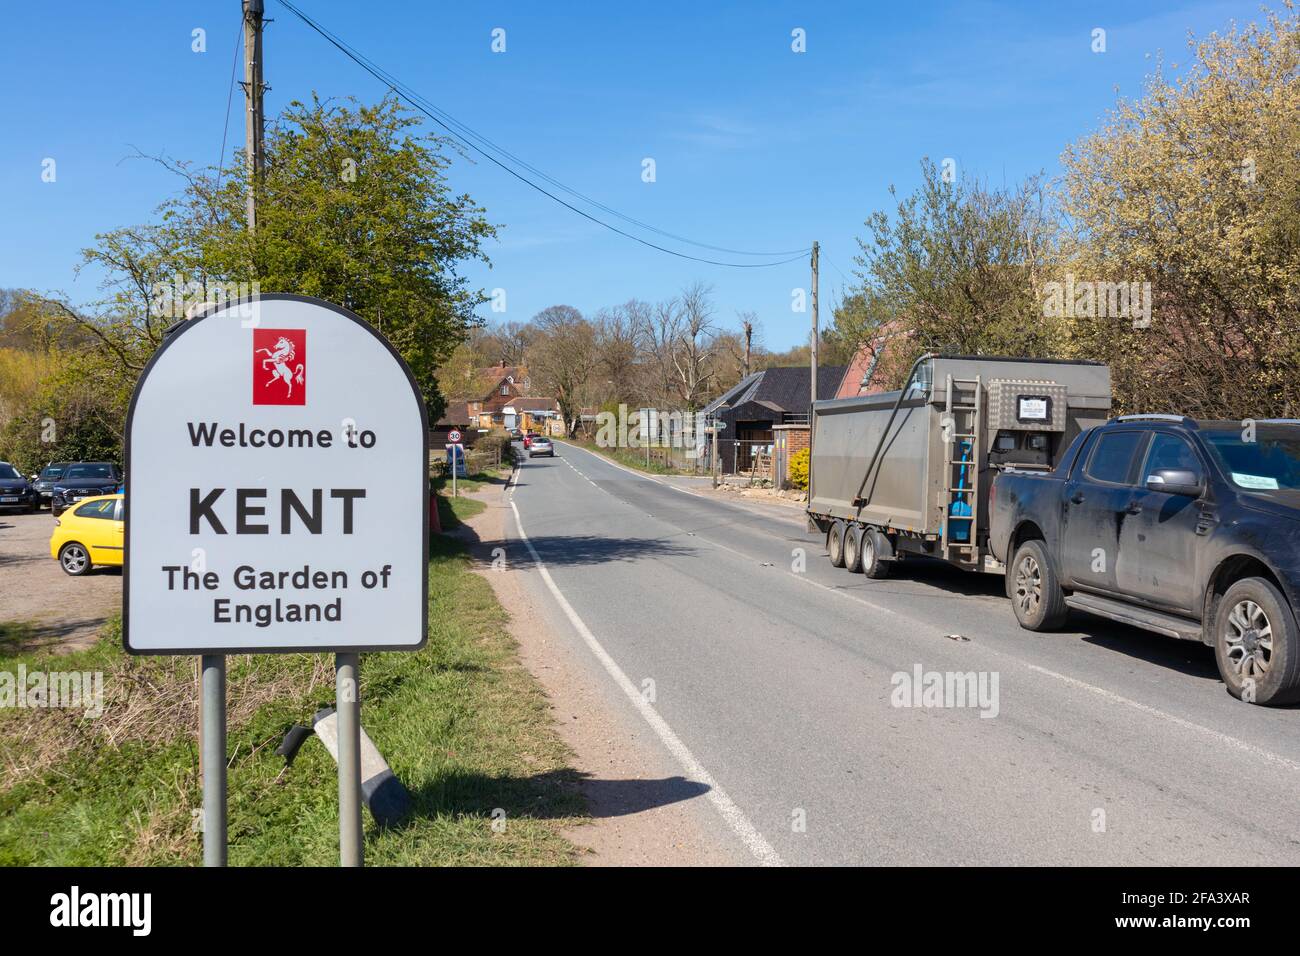 Welcome to Kent, The garden of England sign at the entrance to Newenden the smallest village in Kent, uk Stock Photo